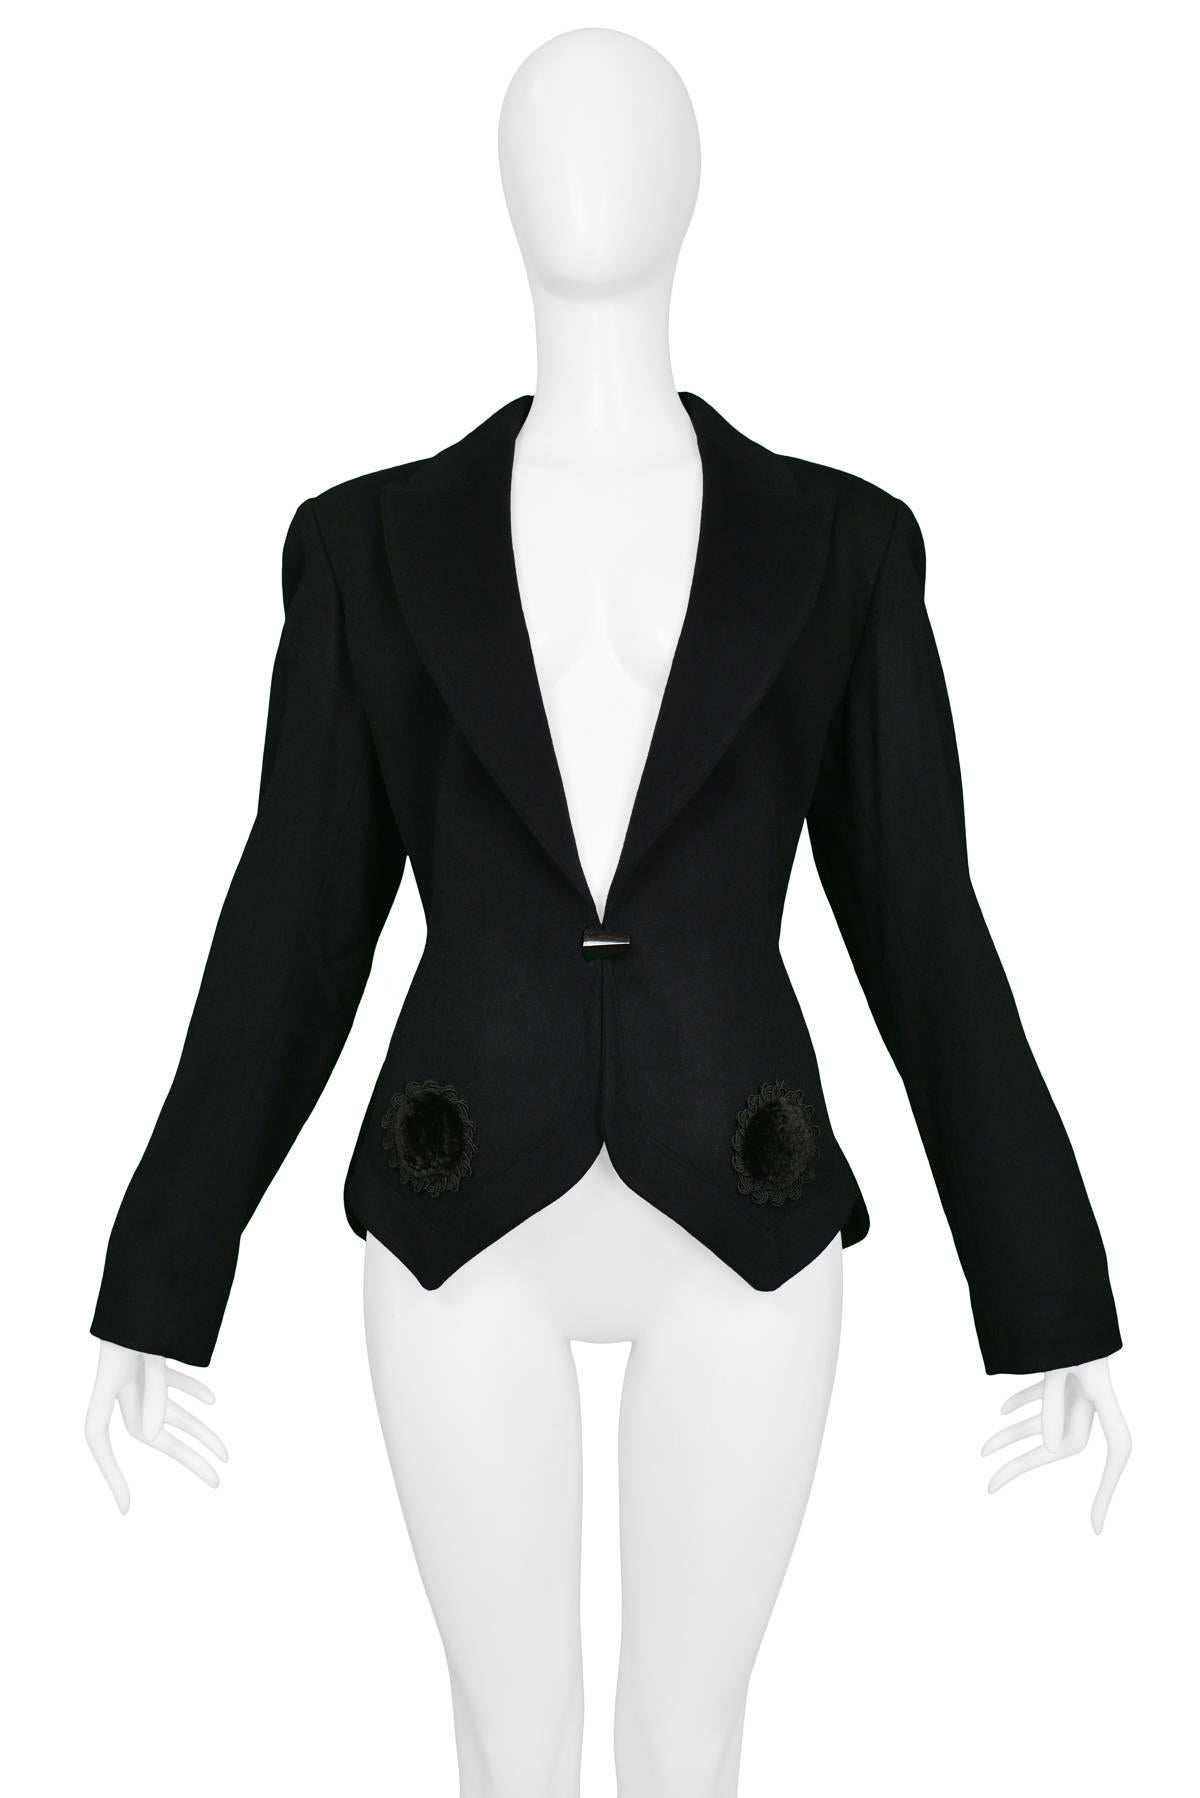 Vintage never worn black Azzedine Alaia wool fitted blazer featuring velvet appliques at hem, classic lapel collar, straight sleeves, and single button closure. Collection 1991.

Condition : Deadstock Vintage

Size : 40
Measurements:
Shoulder